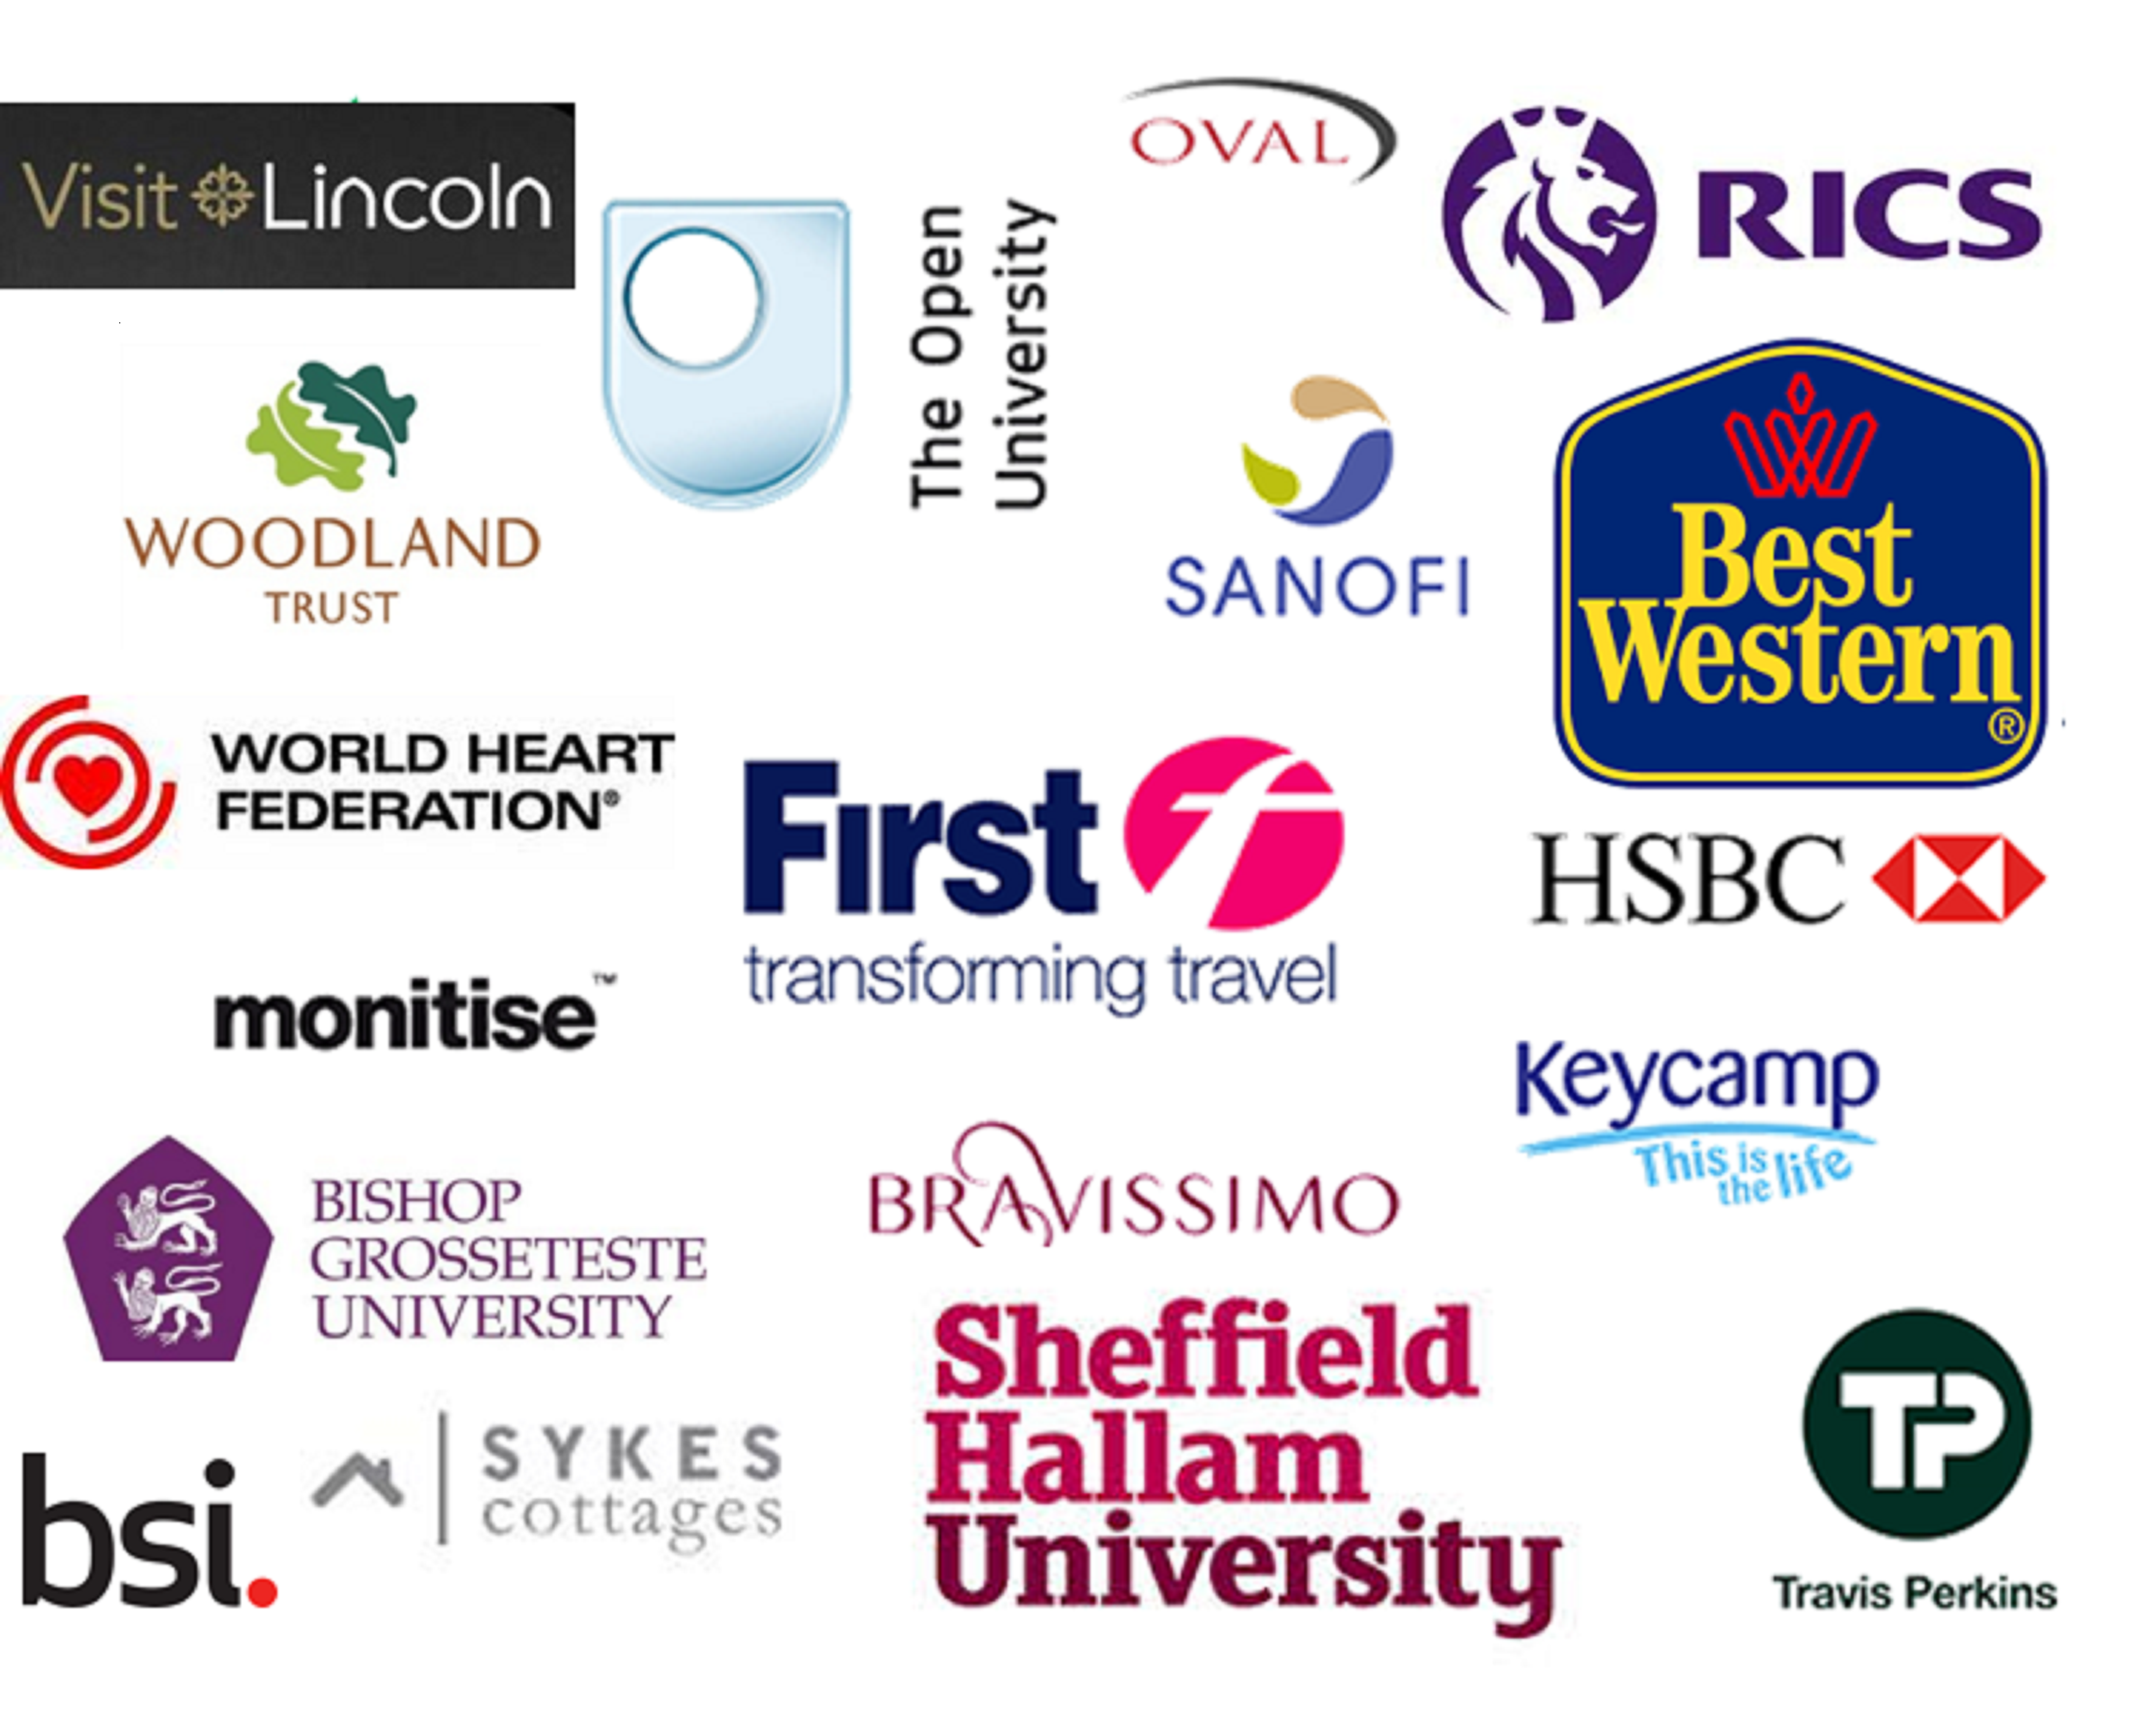 HSBC, The Open University, Thompson & Morgan, Bravissimo, The Co-operative Bank, Monitise, Engage Mutual Assurance, Travis Perkins, Keycamp, Acdoco, First, BGL Group, Topps Tiles, Oval Group Limited, Barchester Healthcare and Sanofi